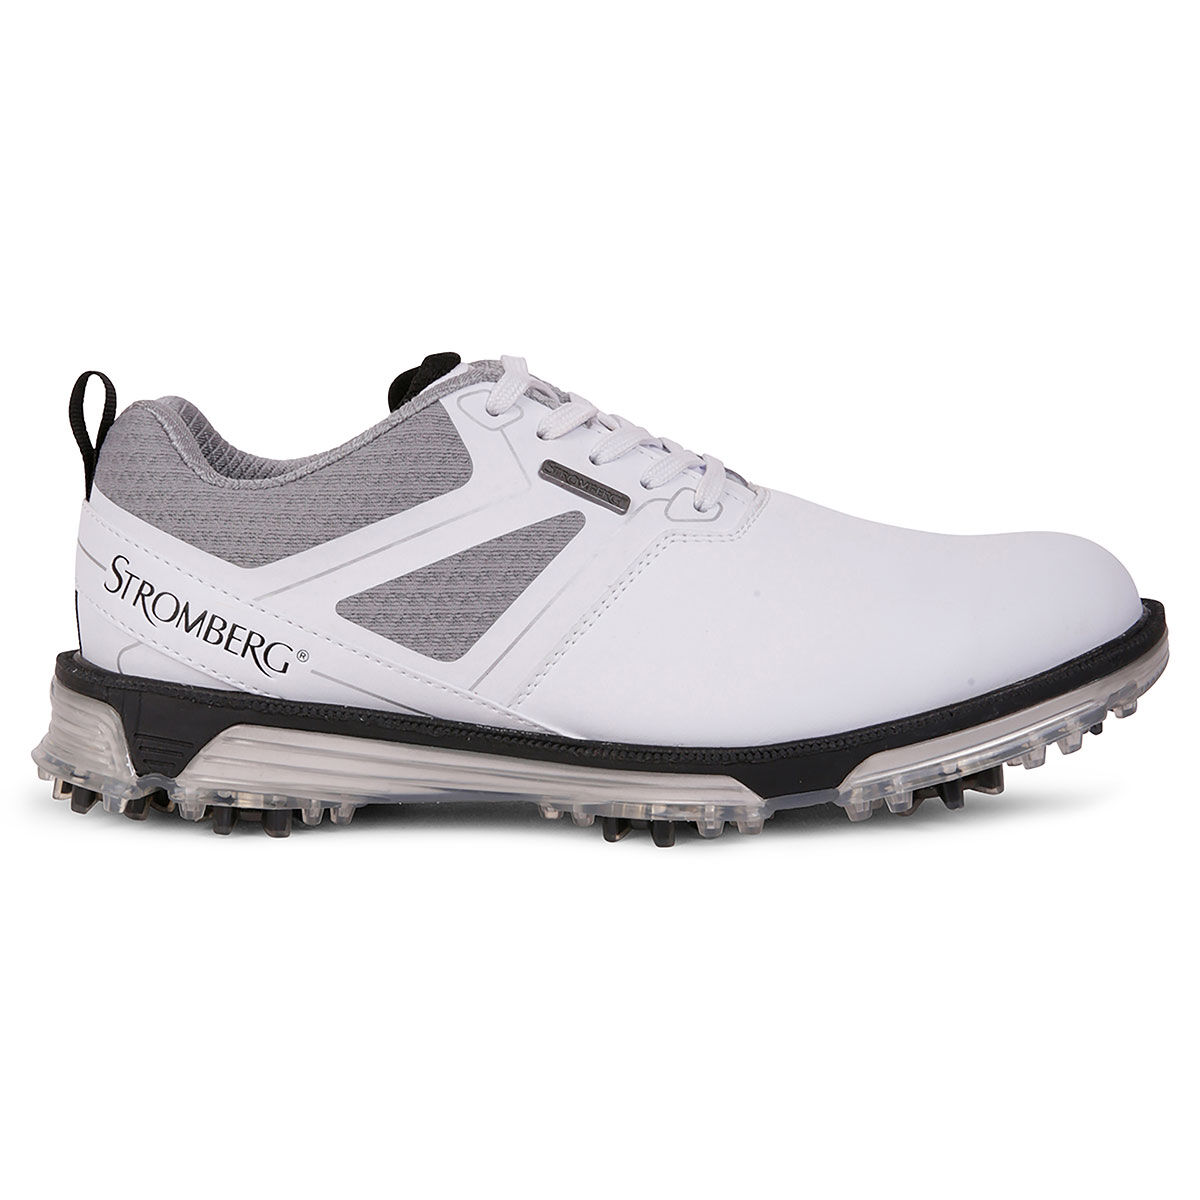 Stromberg Men's Tour Classic Waterproof Spiked Golf Shoes, Mens, White, 9 | American Golf von Stromberg